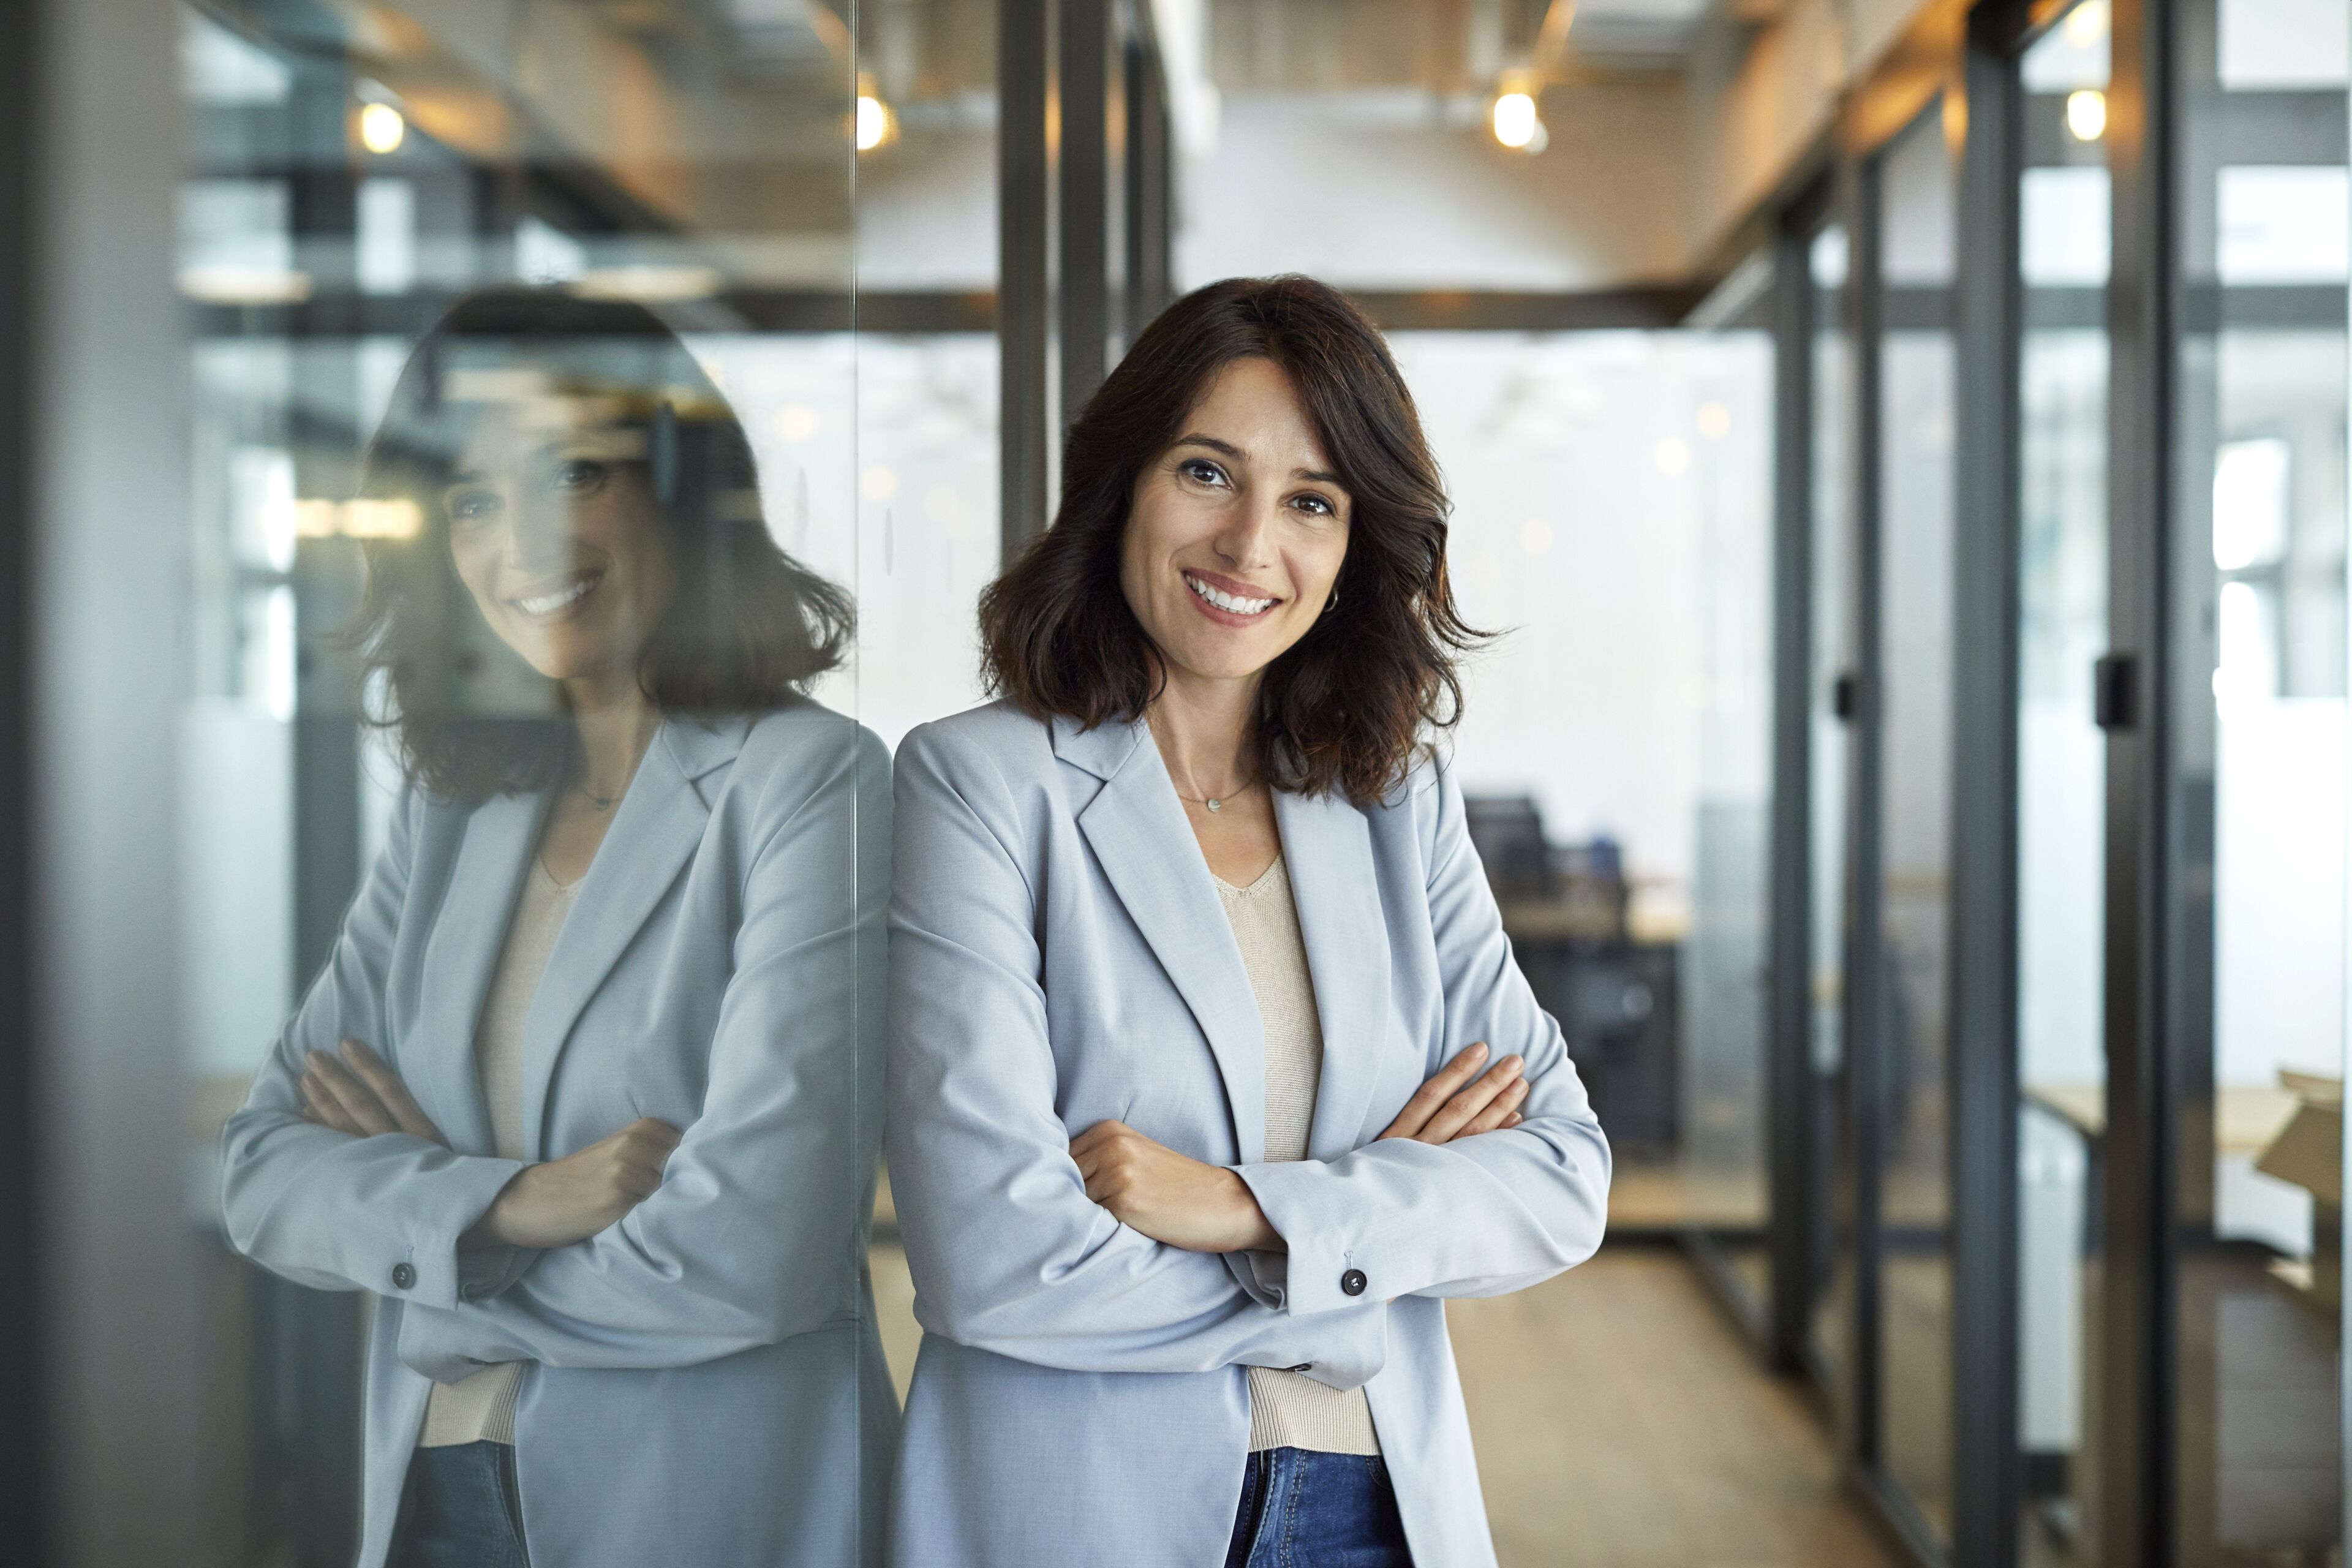 A professional woman in a light grey blazer stands with crossed arms, smiling in a modern office setting, reflecting confidence and approachability.